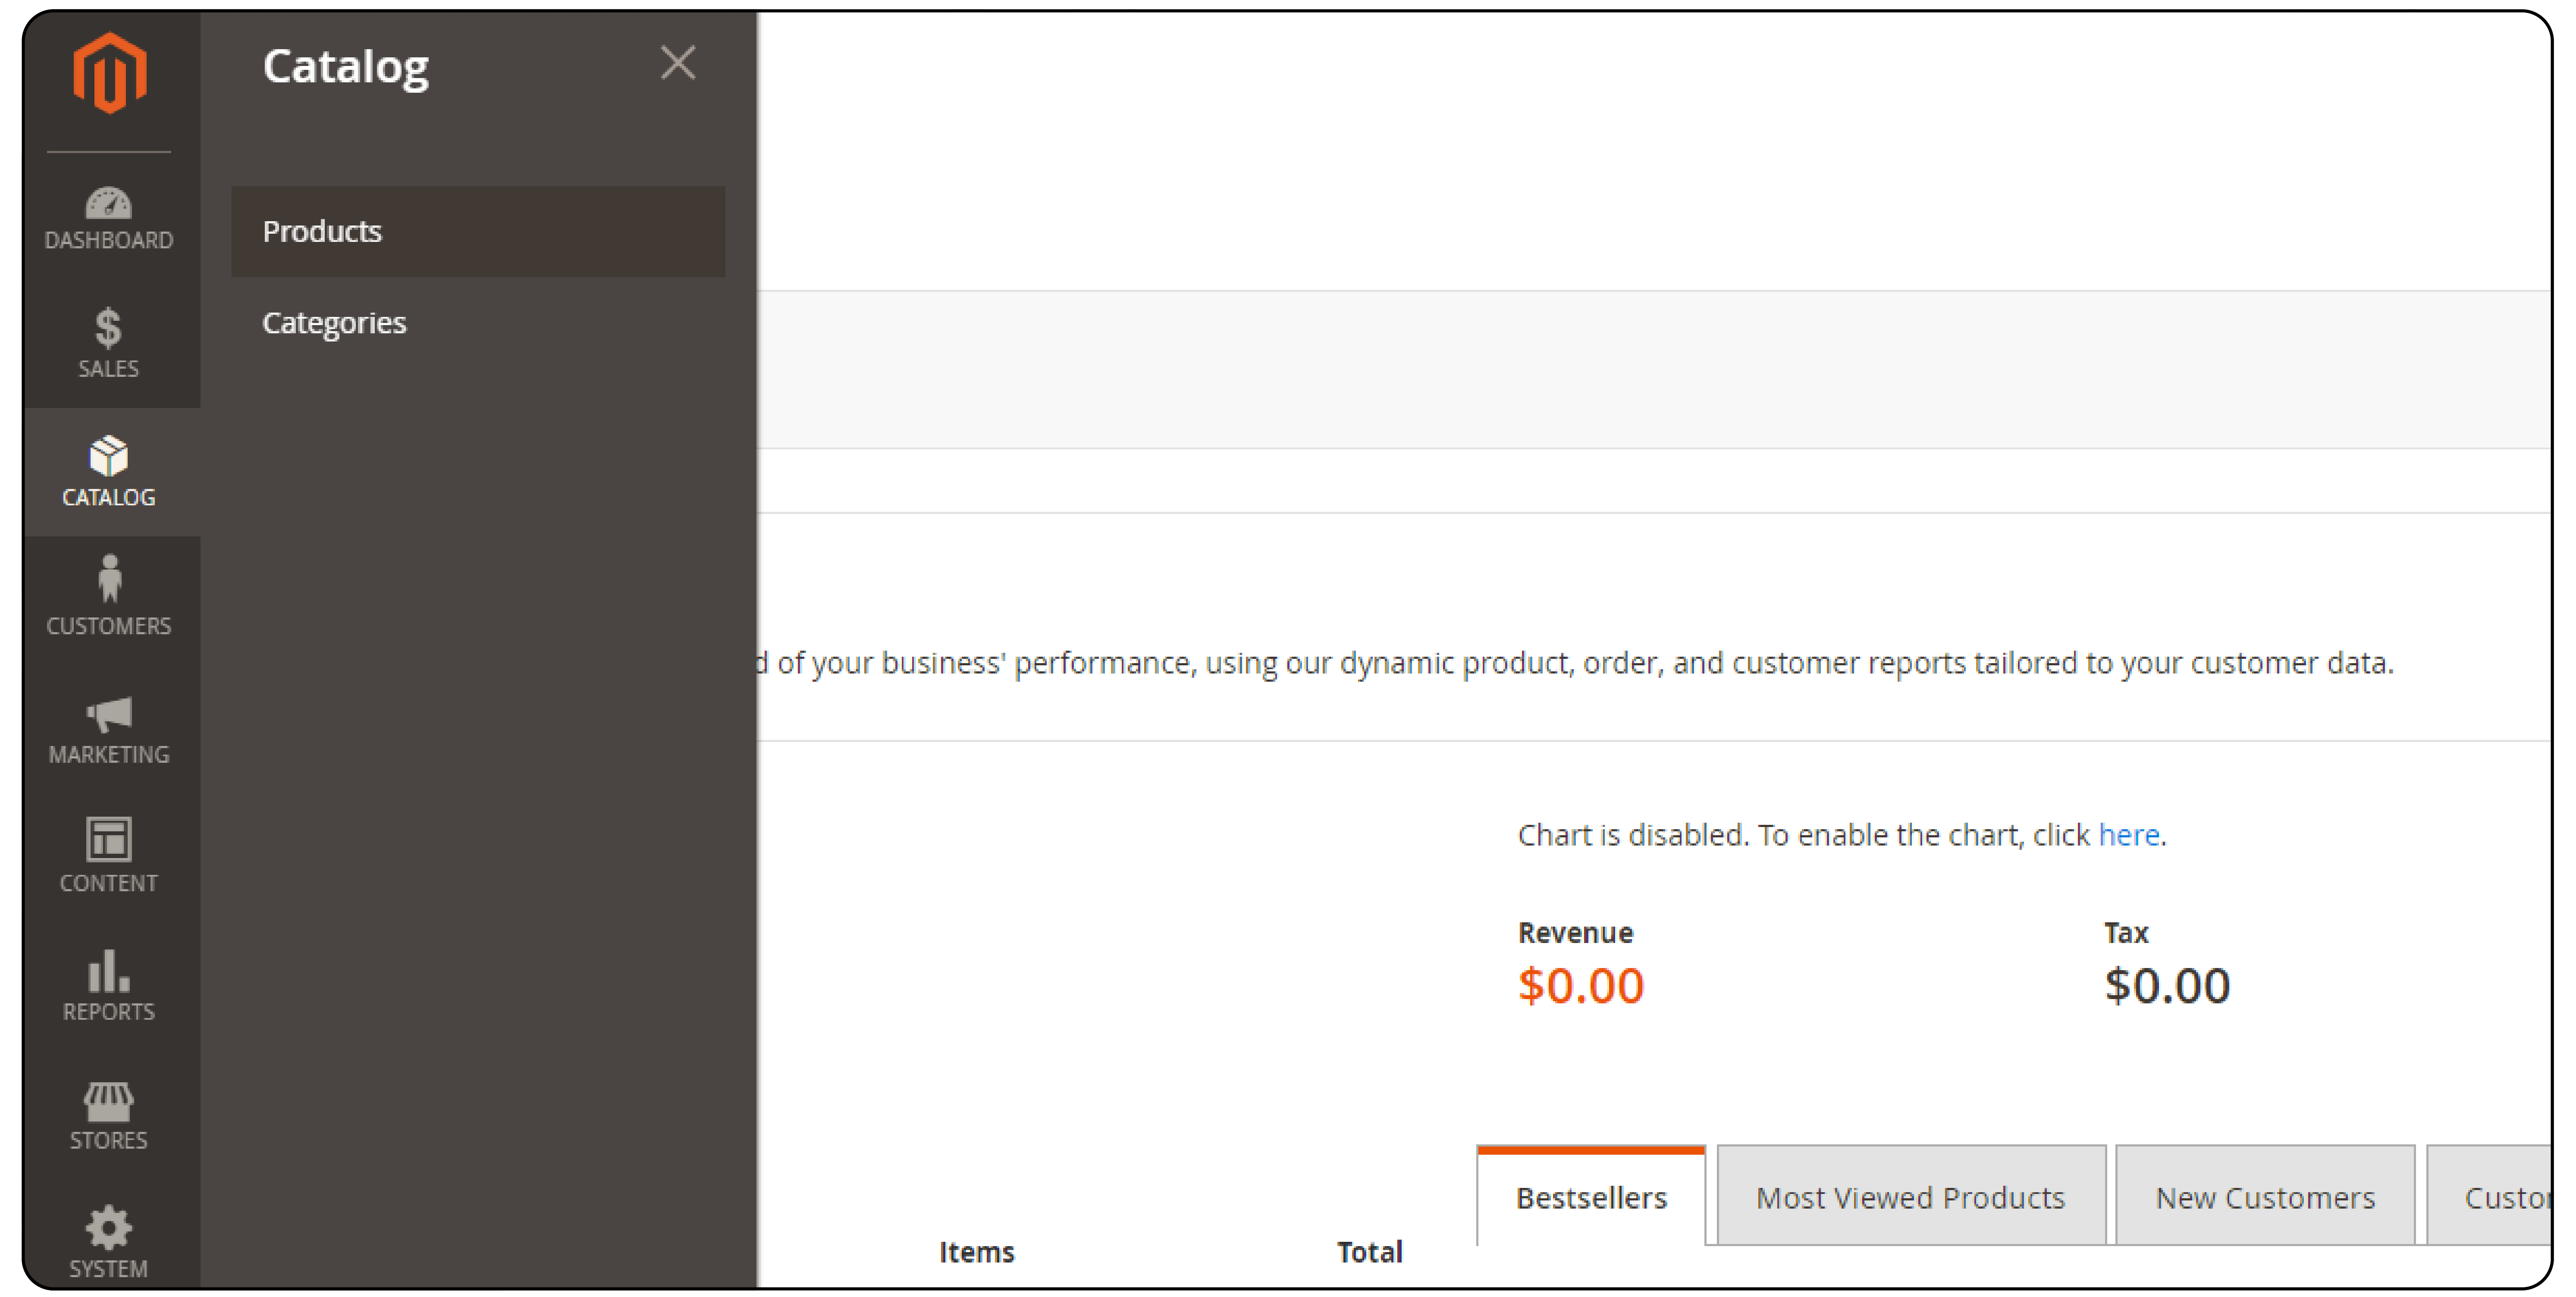 Step-by-step guide to setting up tier prices in Magento 2 interface